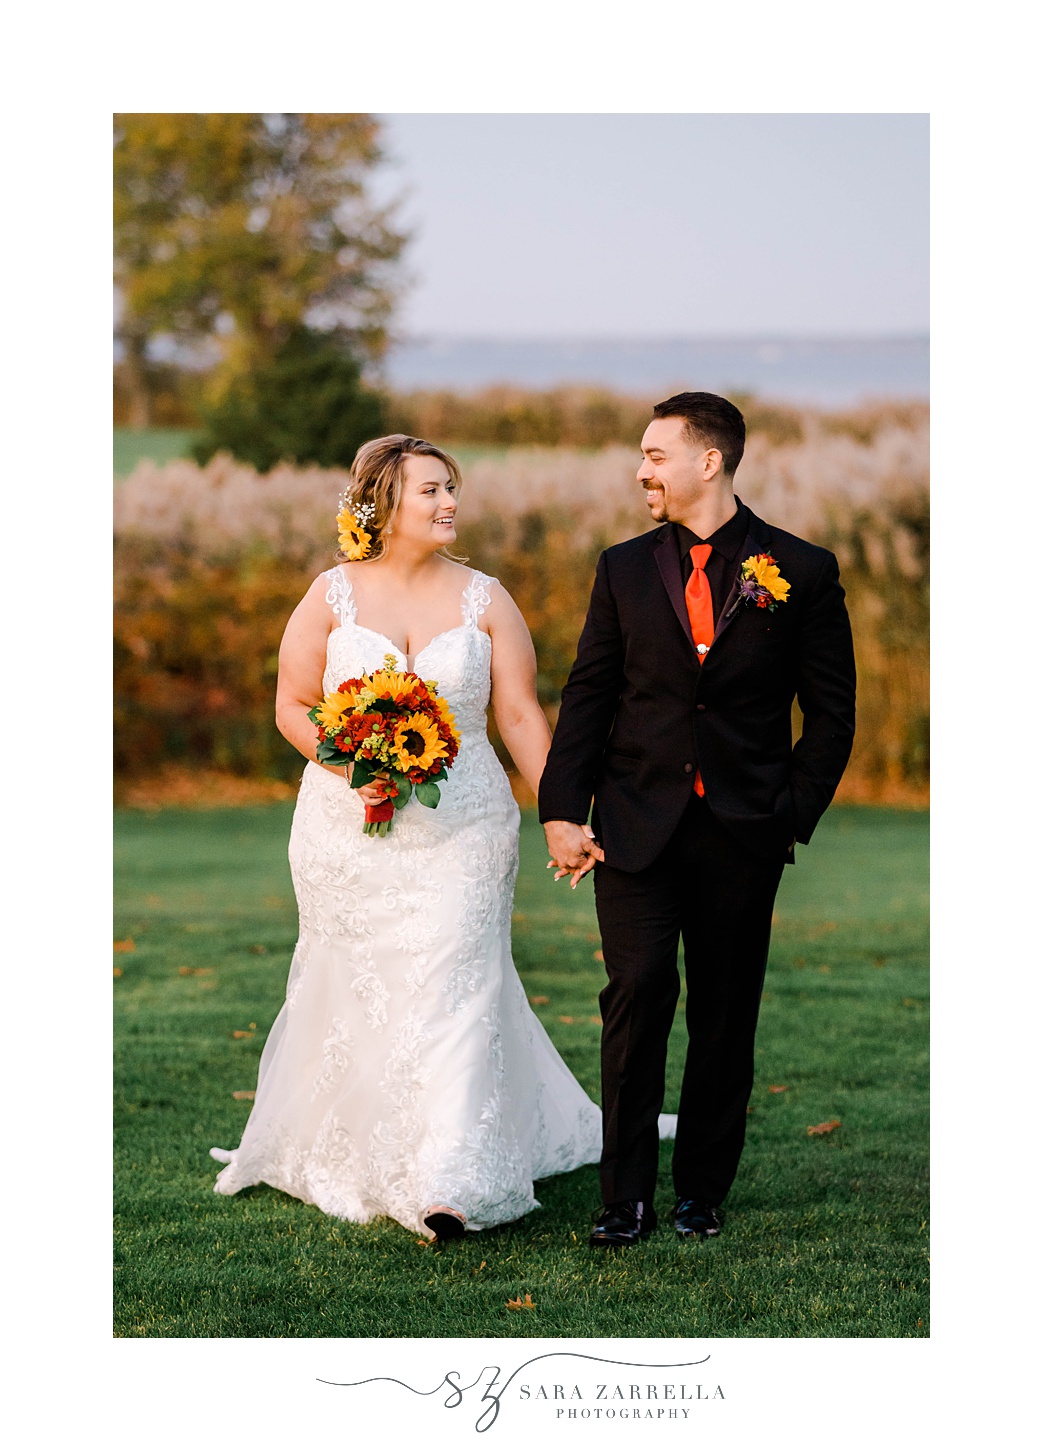 bride and groom hold hands walking across lawn while bride holds sunflower bouquet 